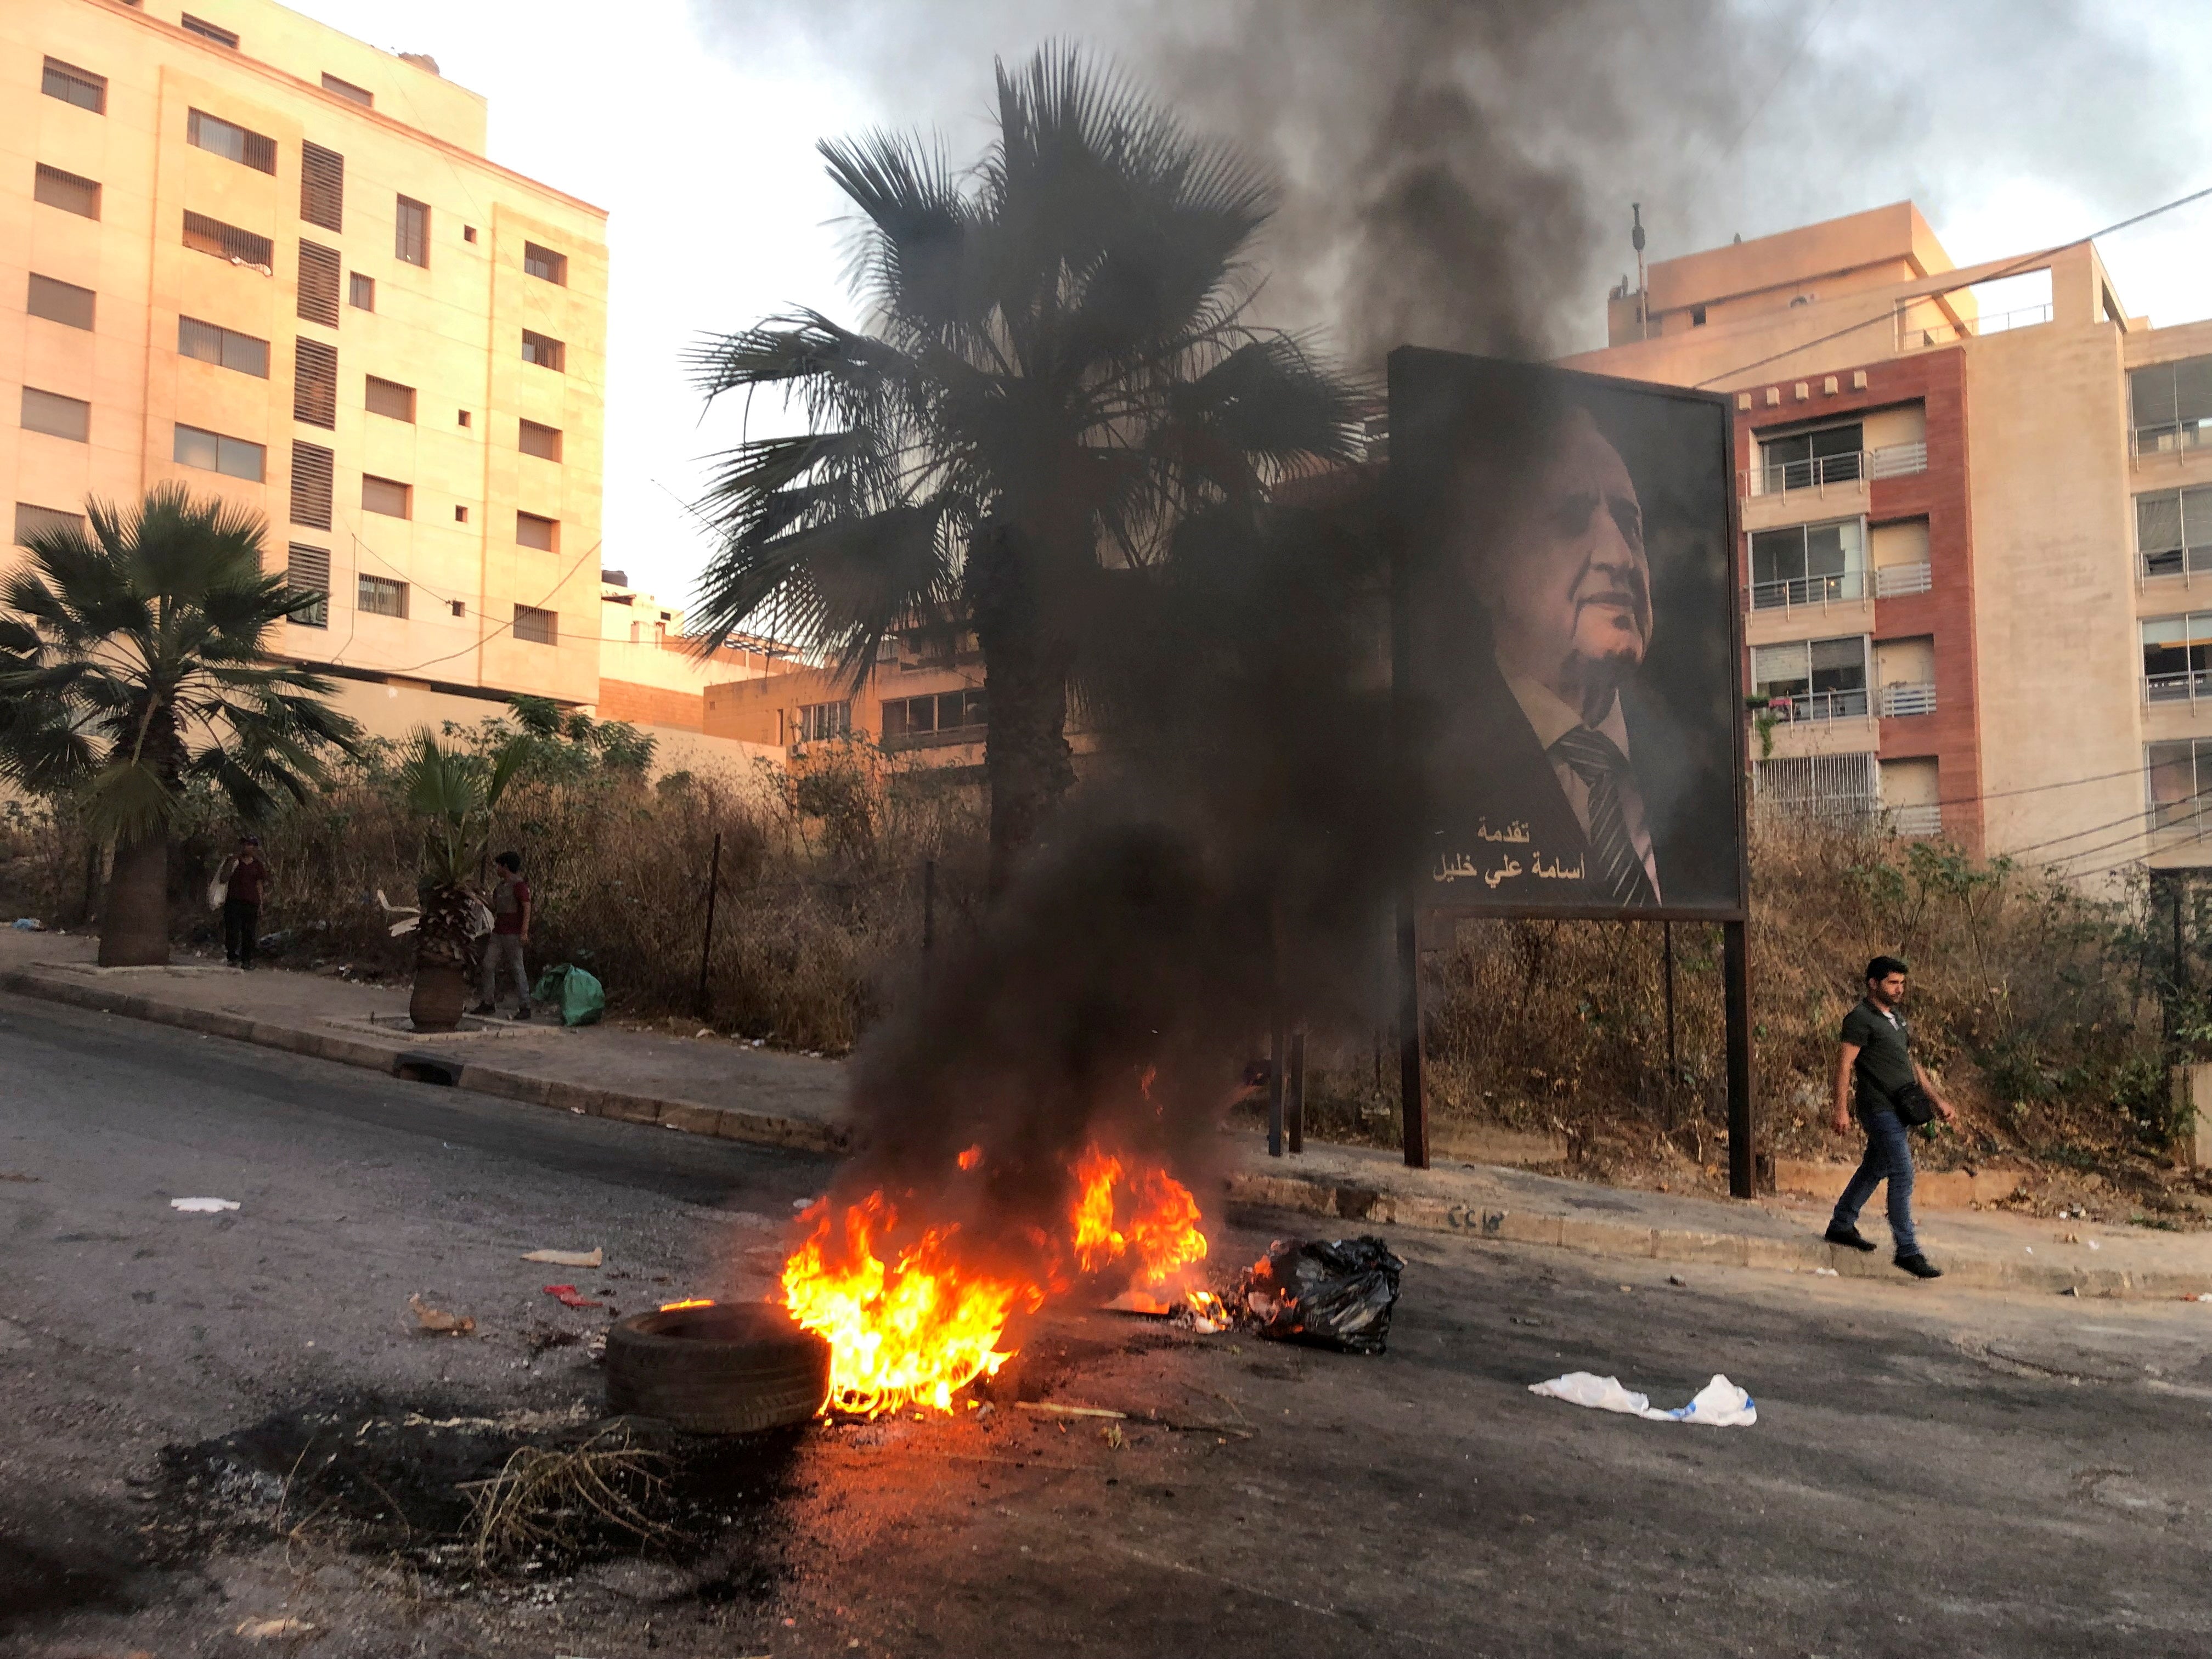 A man walks near a burning fire blocking a road during a protest against mounting economic hardships in Beirut